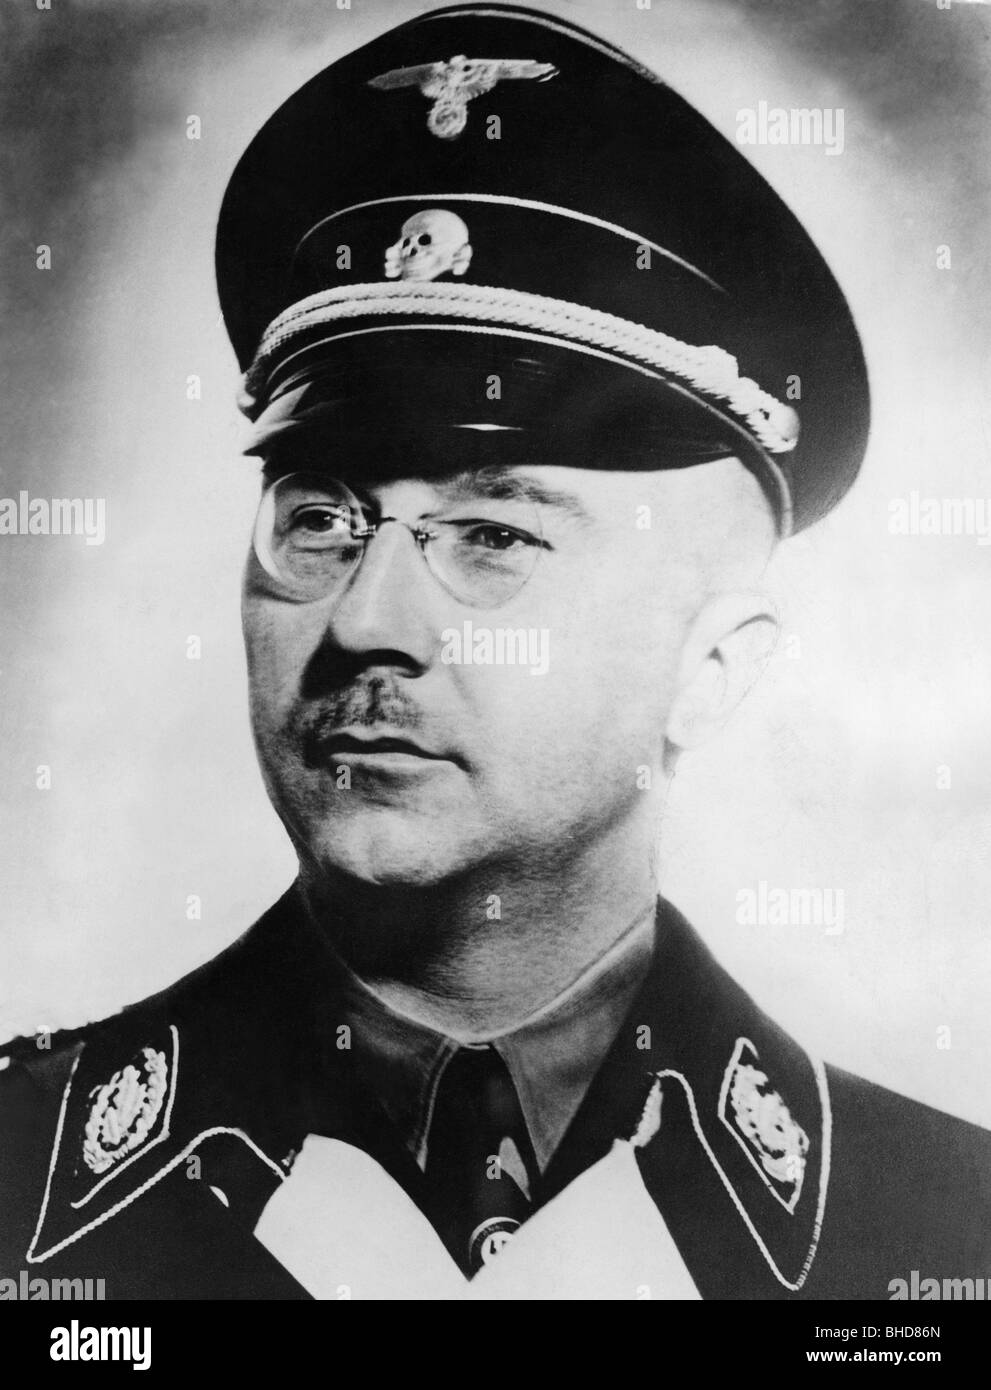 The chief of the german police and reich leader ss hi-res stock ...